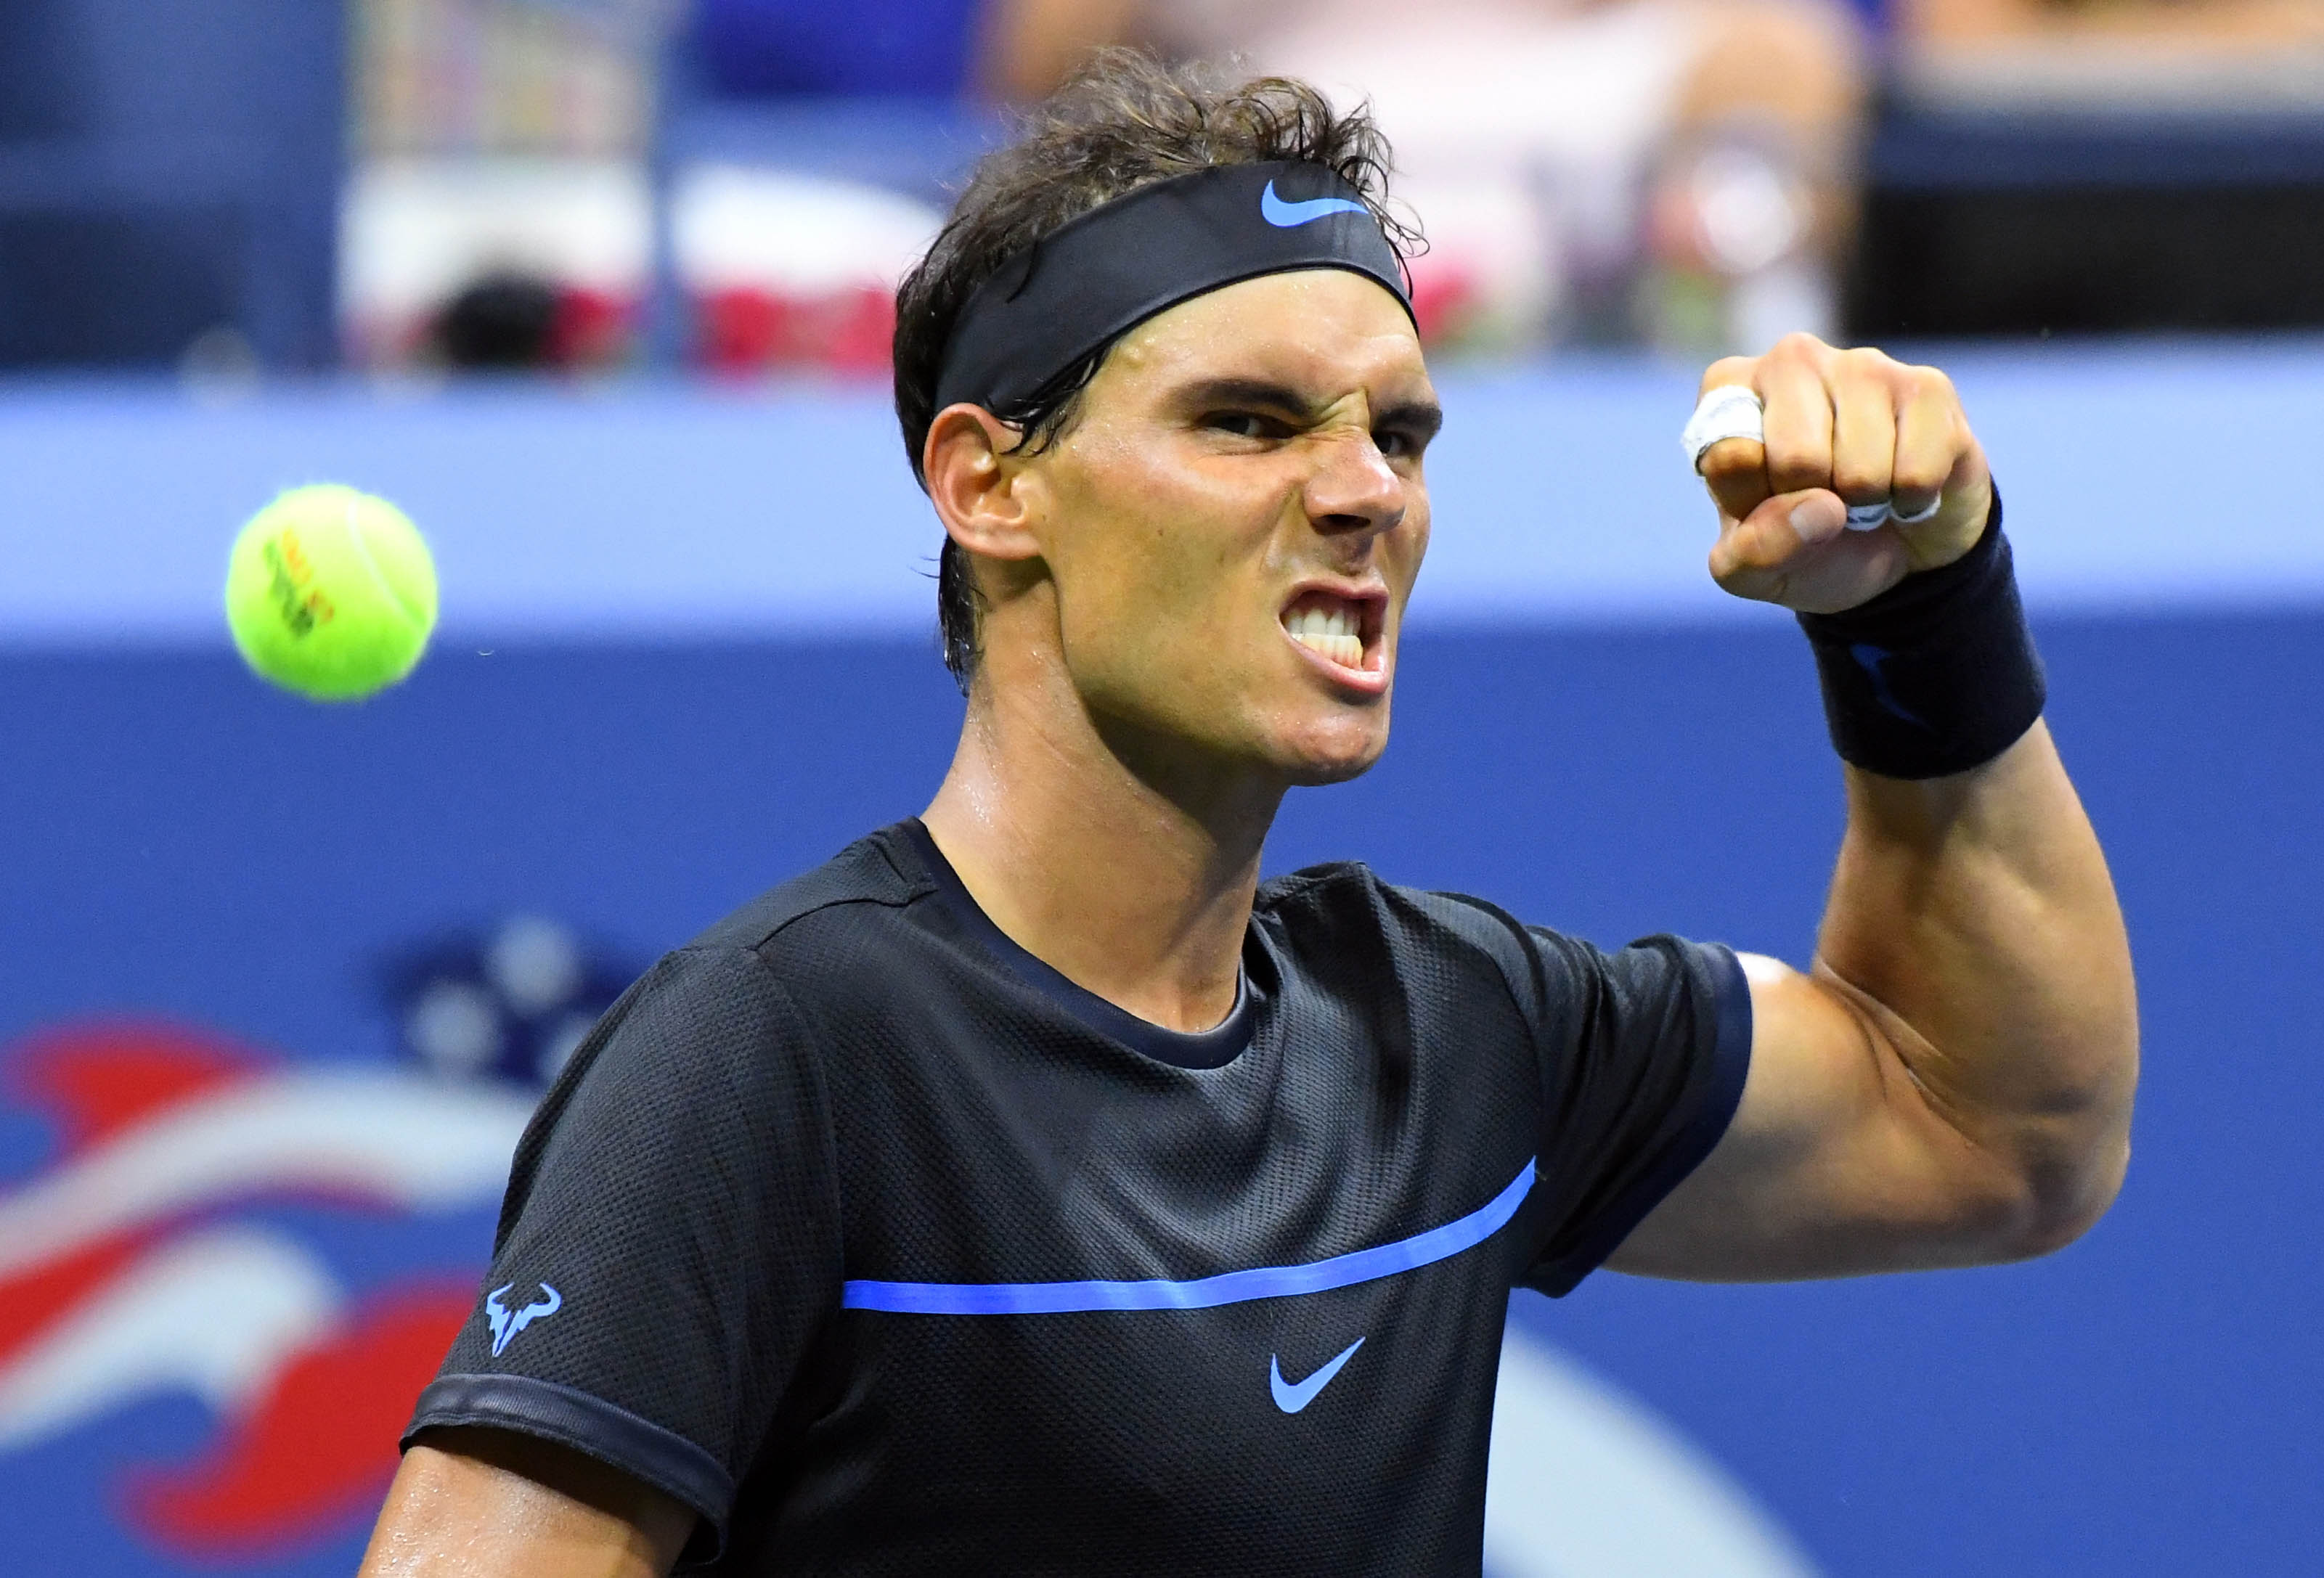 Tennis: Nadal completes 'roof' double at US Open